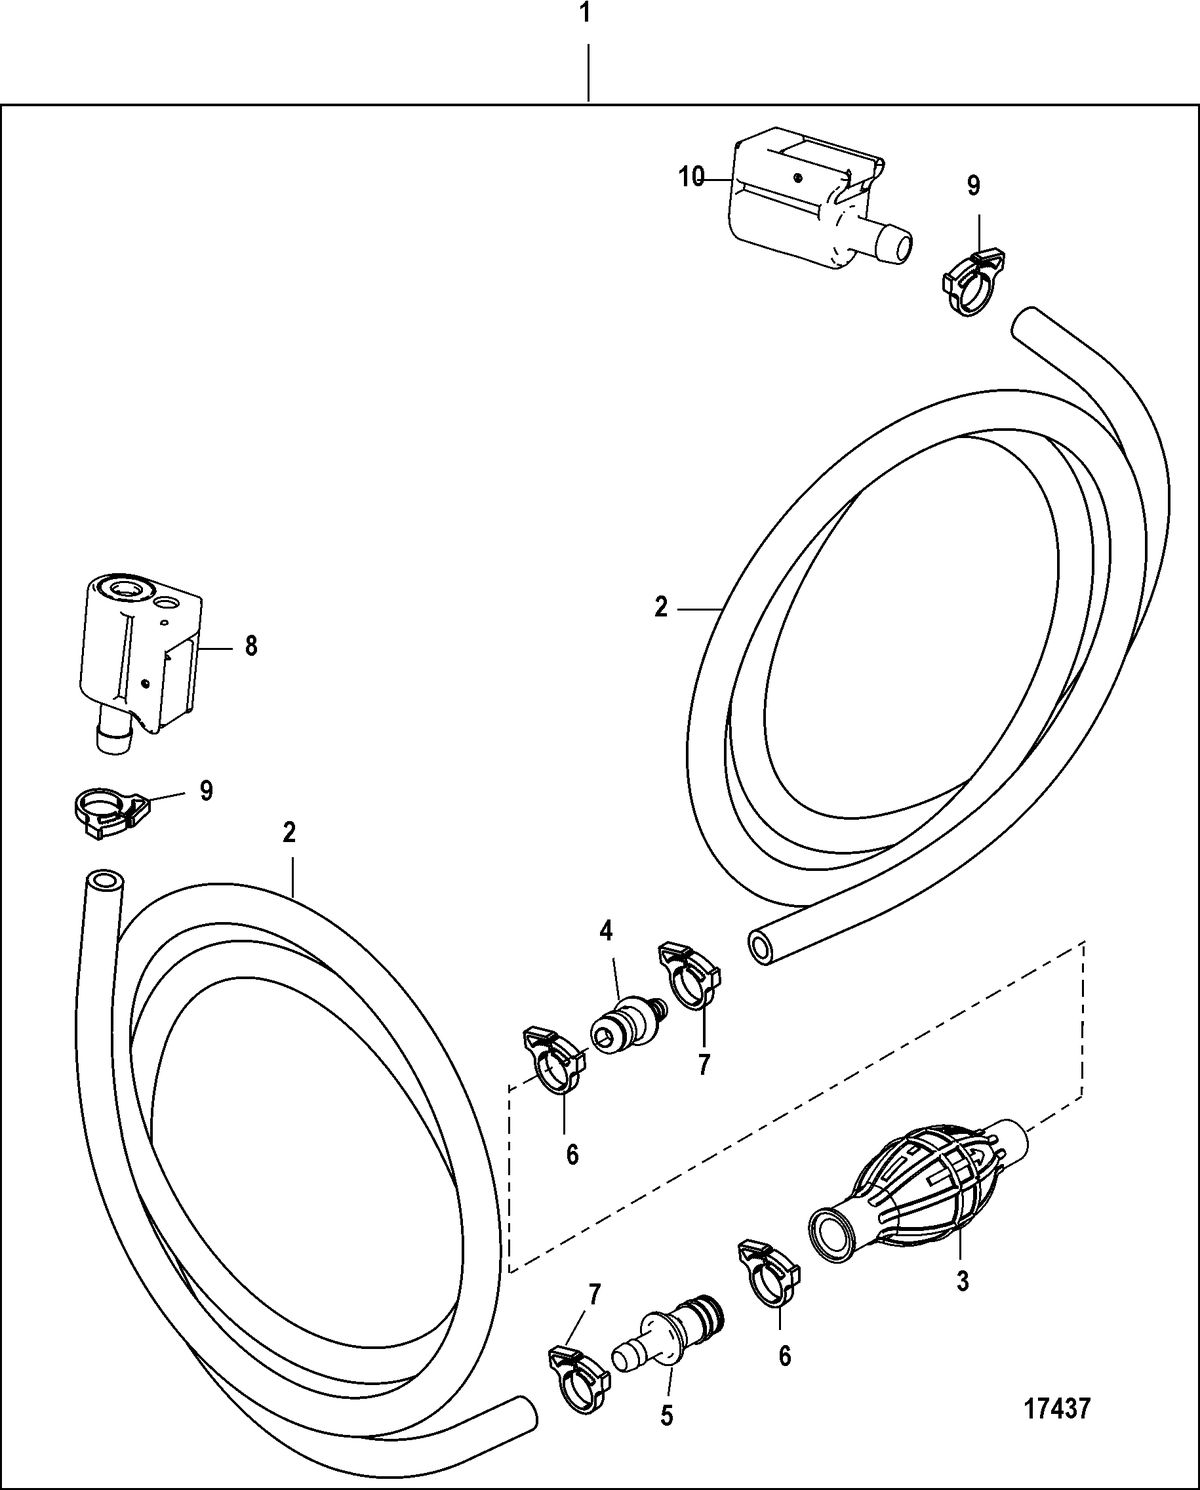 ACCESSORIES FUEL/OIL TANKS, LINES, FILTER KITS AND CORROSION Fuel Line Assembly (Dual Clip on Disconnect-Design III)